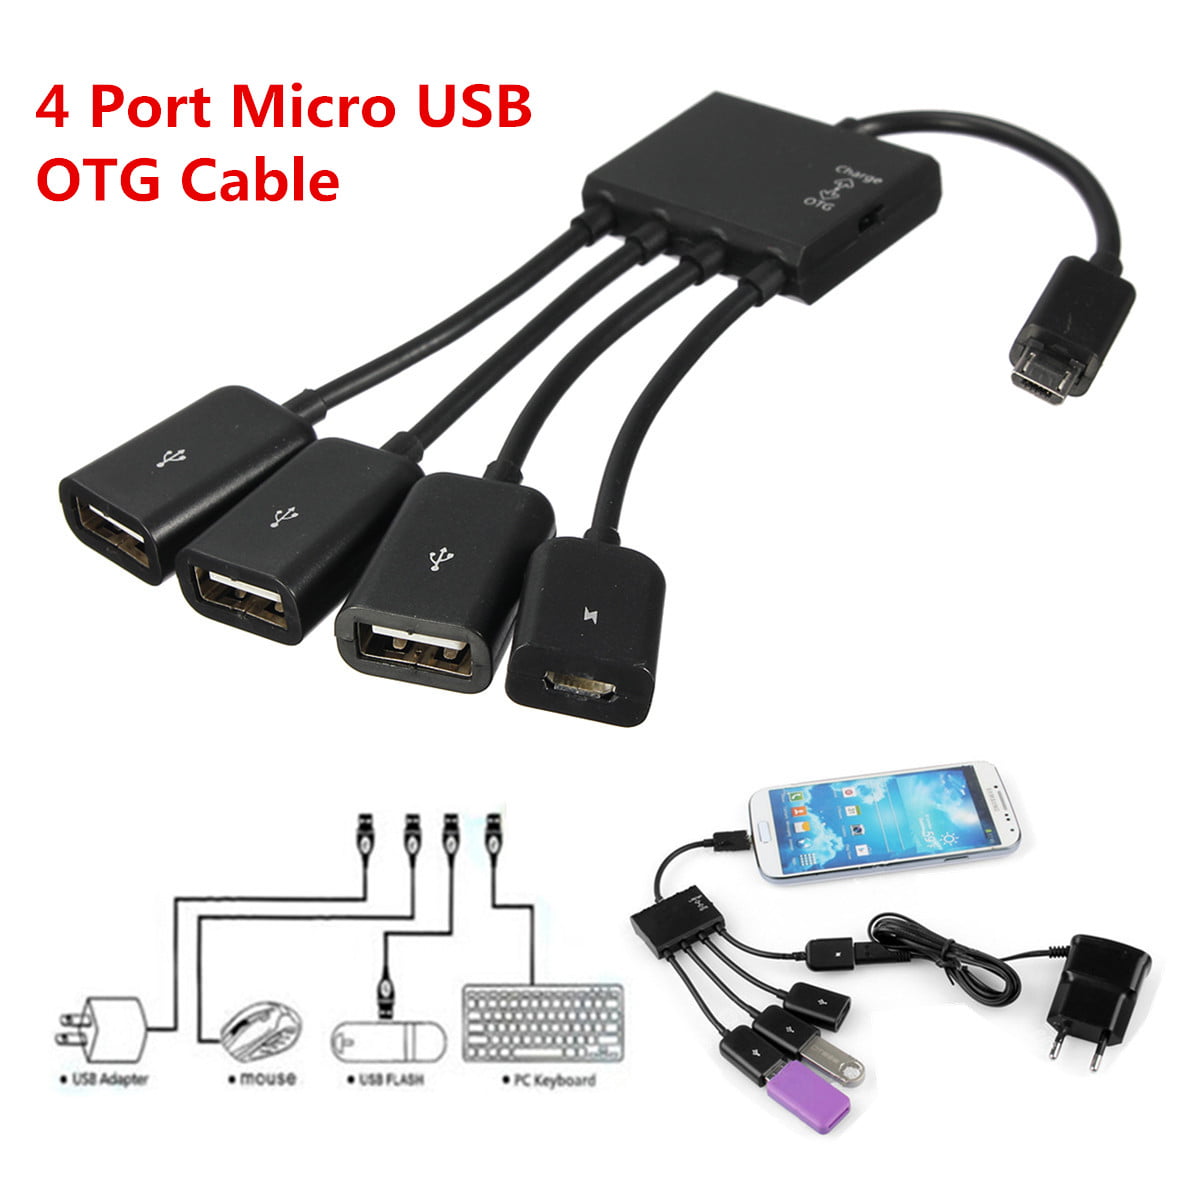 for Trio Pro 8 Tablet Windows 8.1 Micro USB Host OTG Adapter Cable Cord 